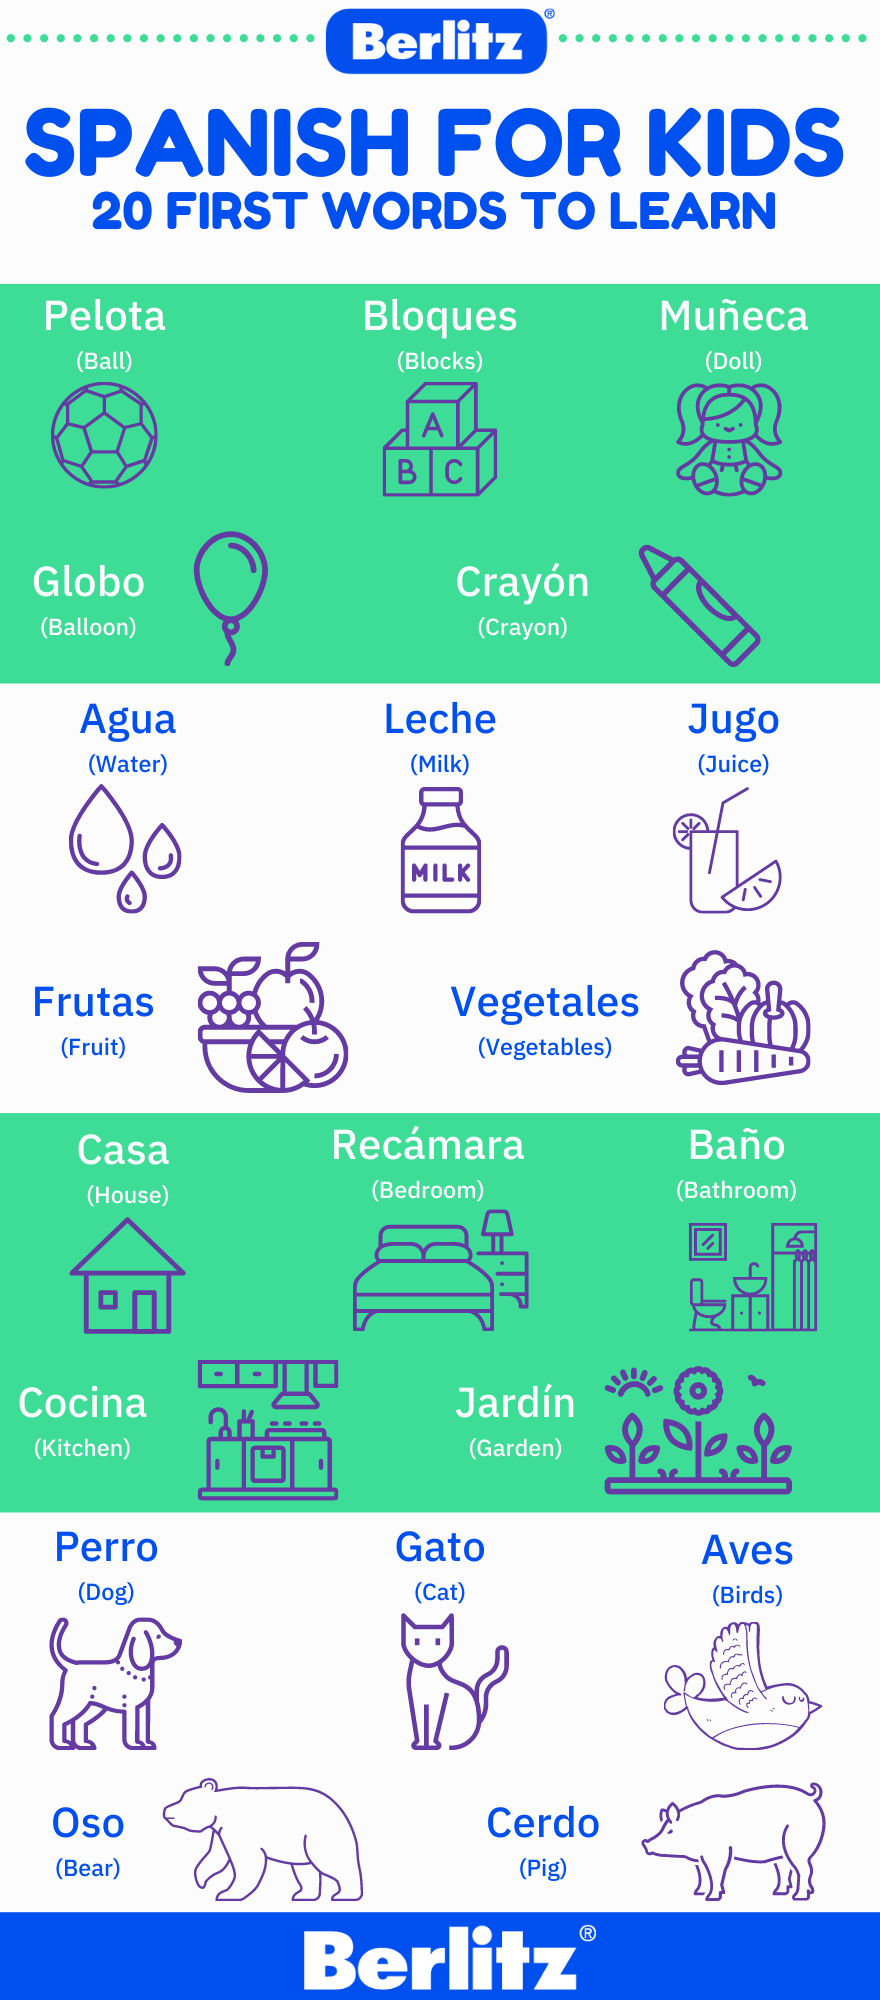 Spanish_for_Kids_-_Vocabulary_(1).png